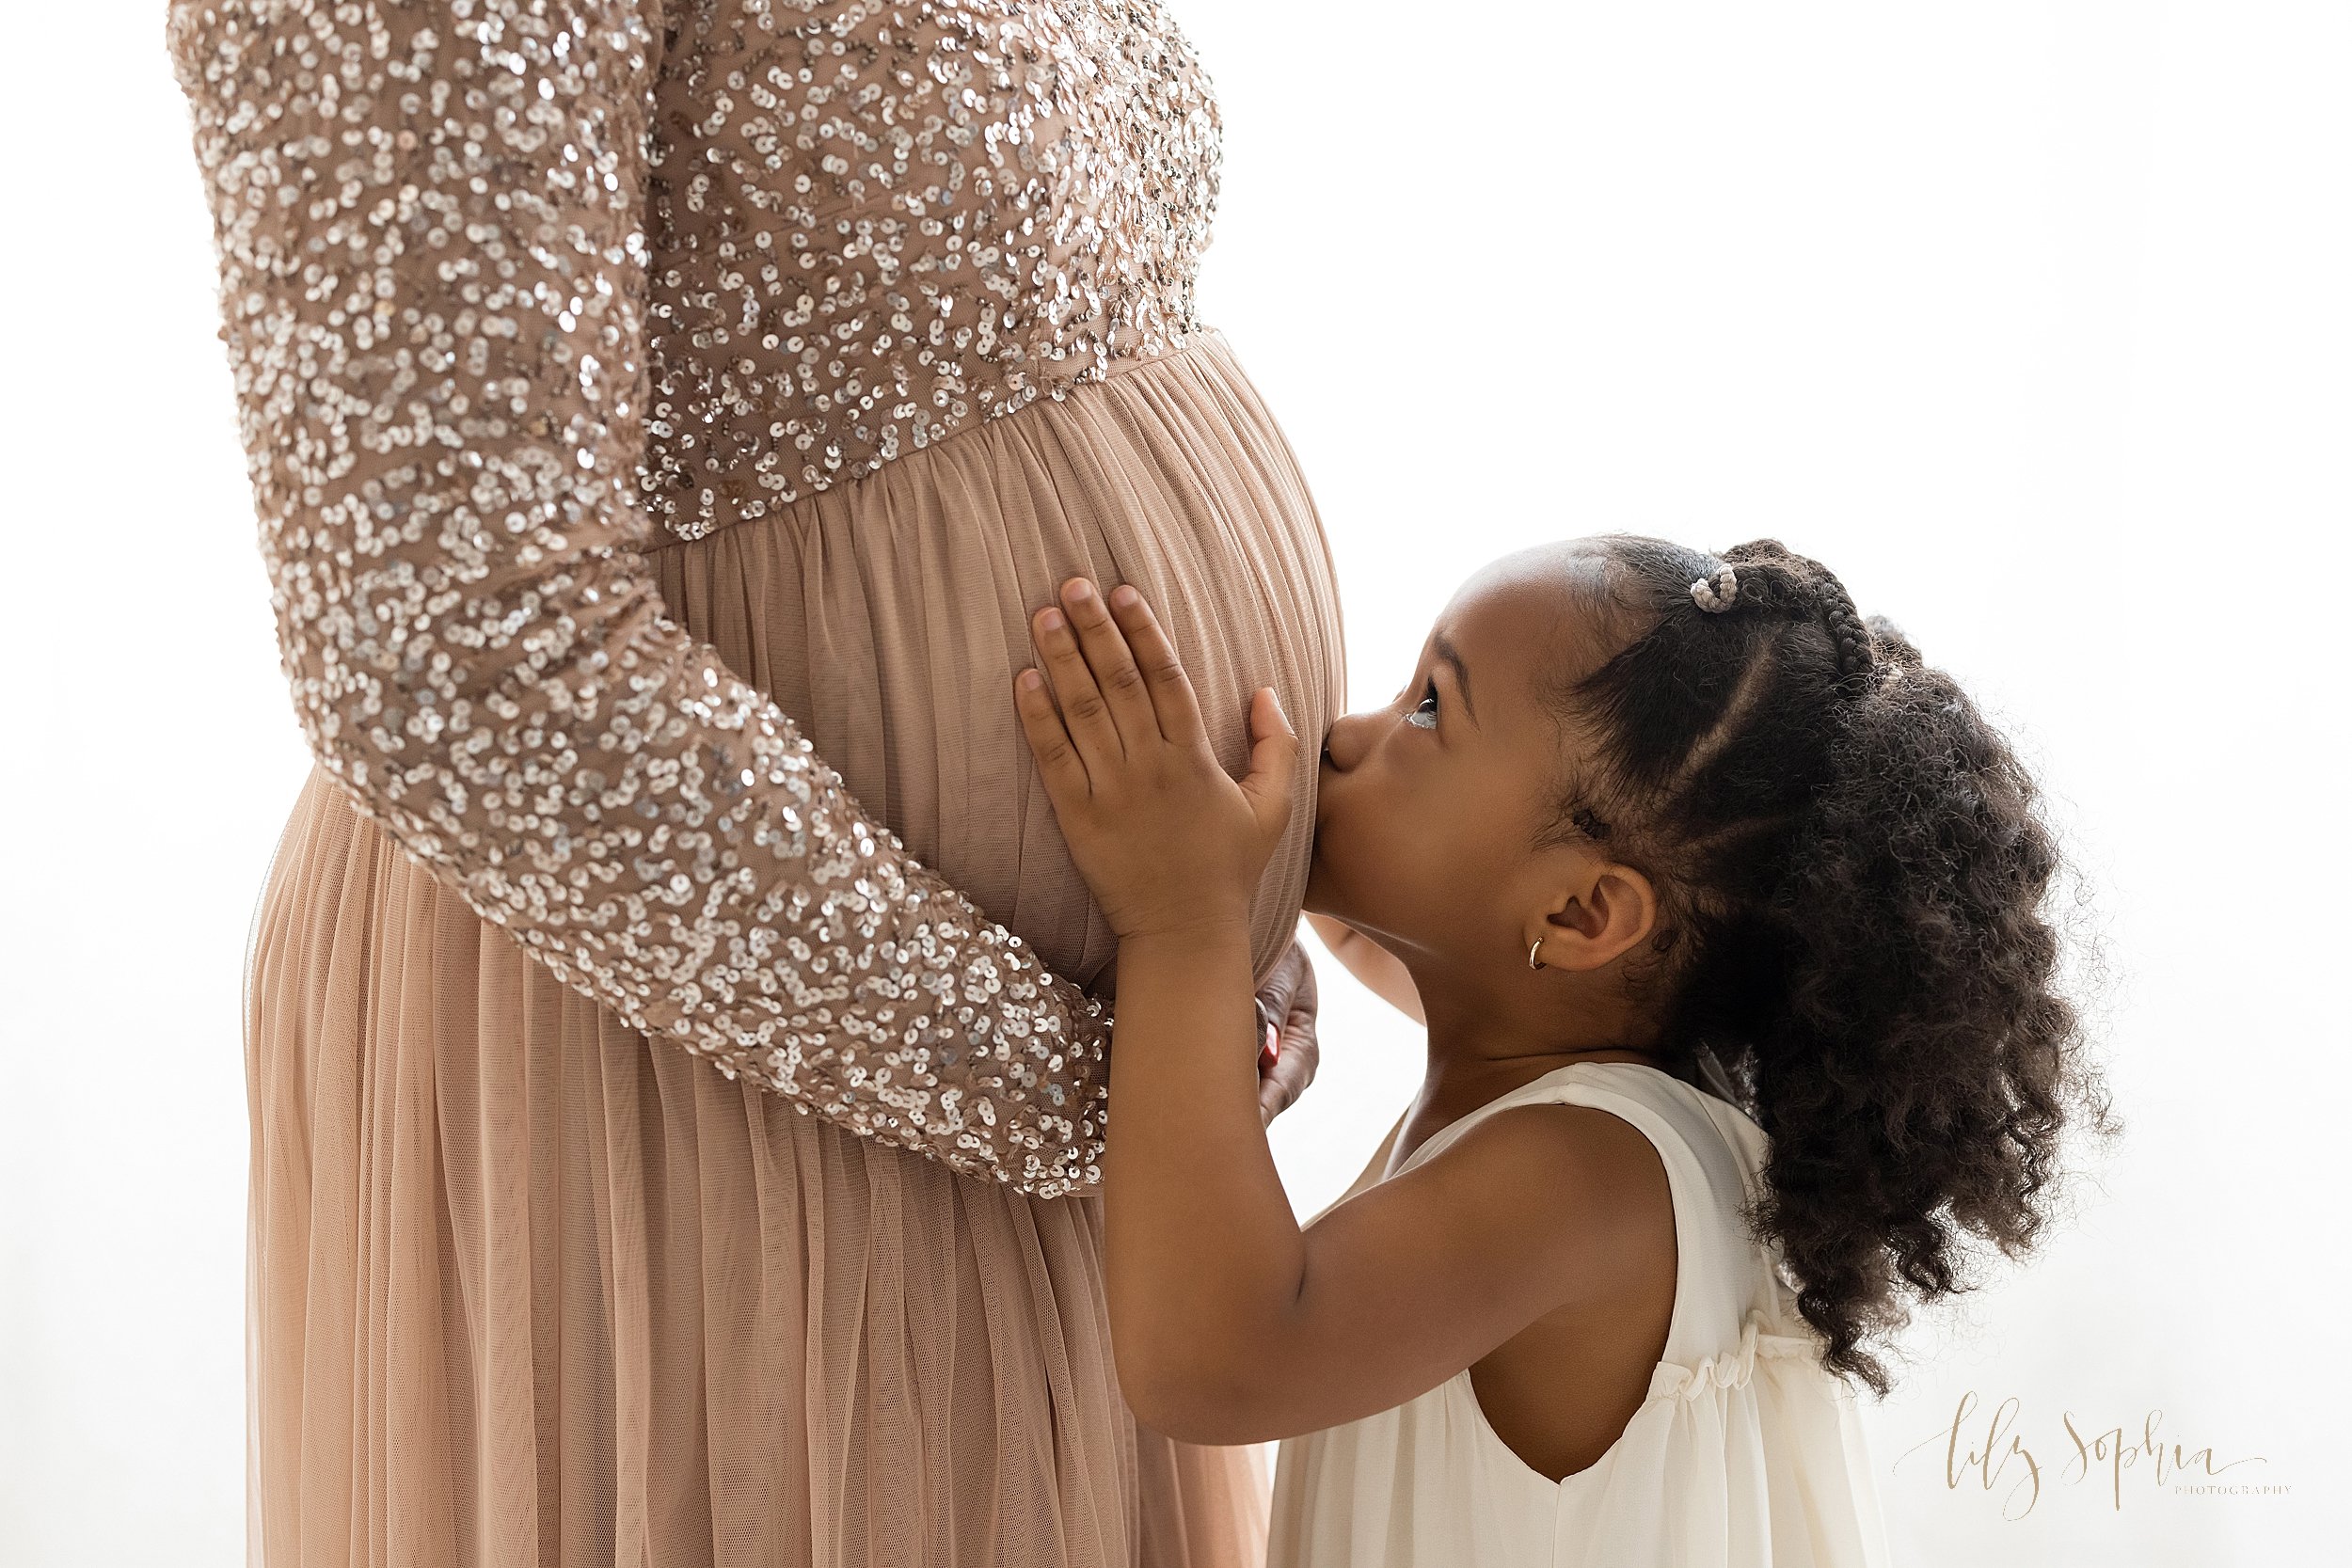  Close-up profile maternity portrait of an African-American mother standing with her hands holding her belly as her young daughter faces her with her hands on her sibling in utero, kisses her mother’s belly while looking up at her mom taken in front 